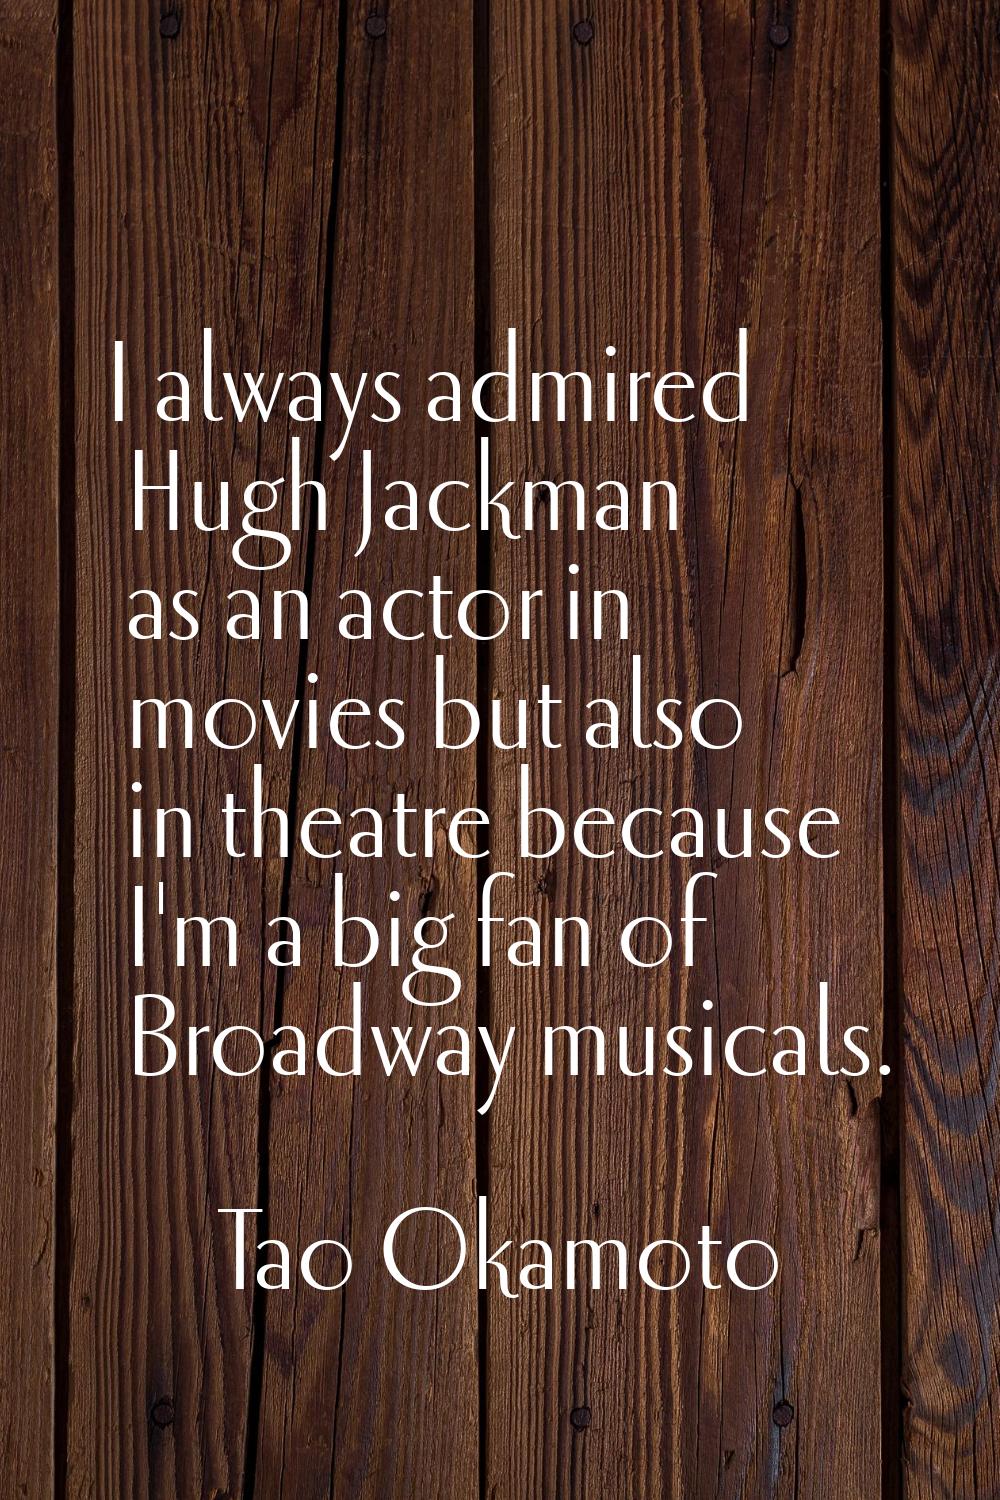 I always admired Hugh Jackman as an actor in movies but also in theatre because I'm a big fan of Br